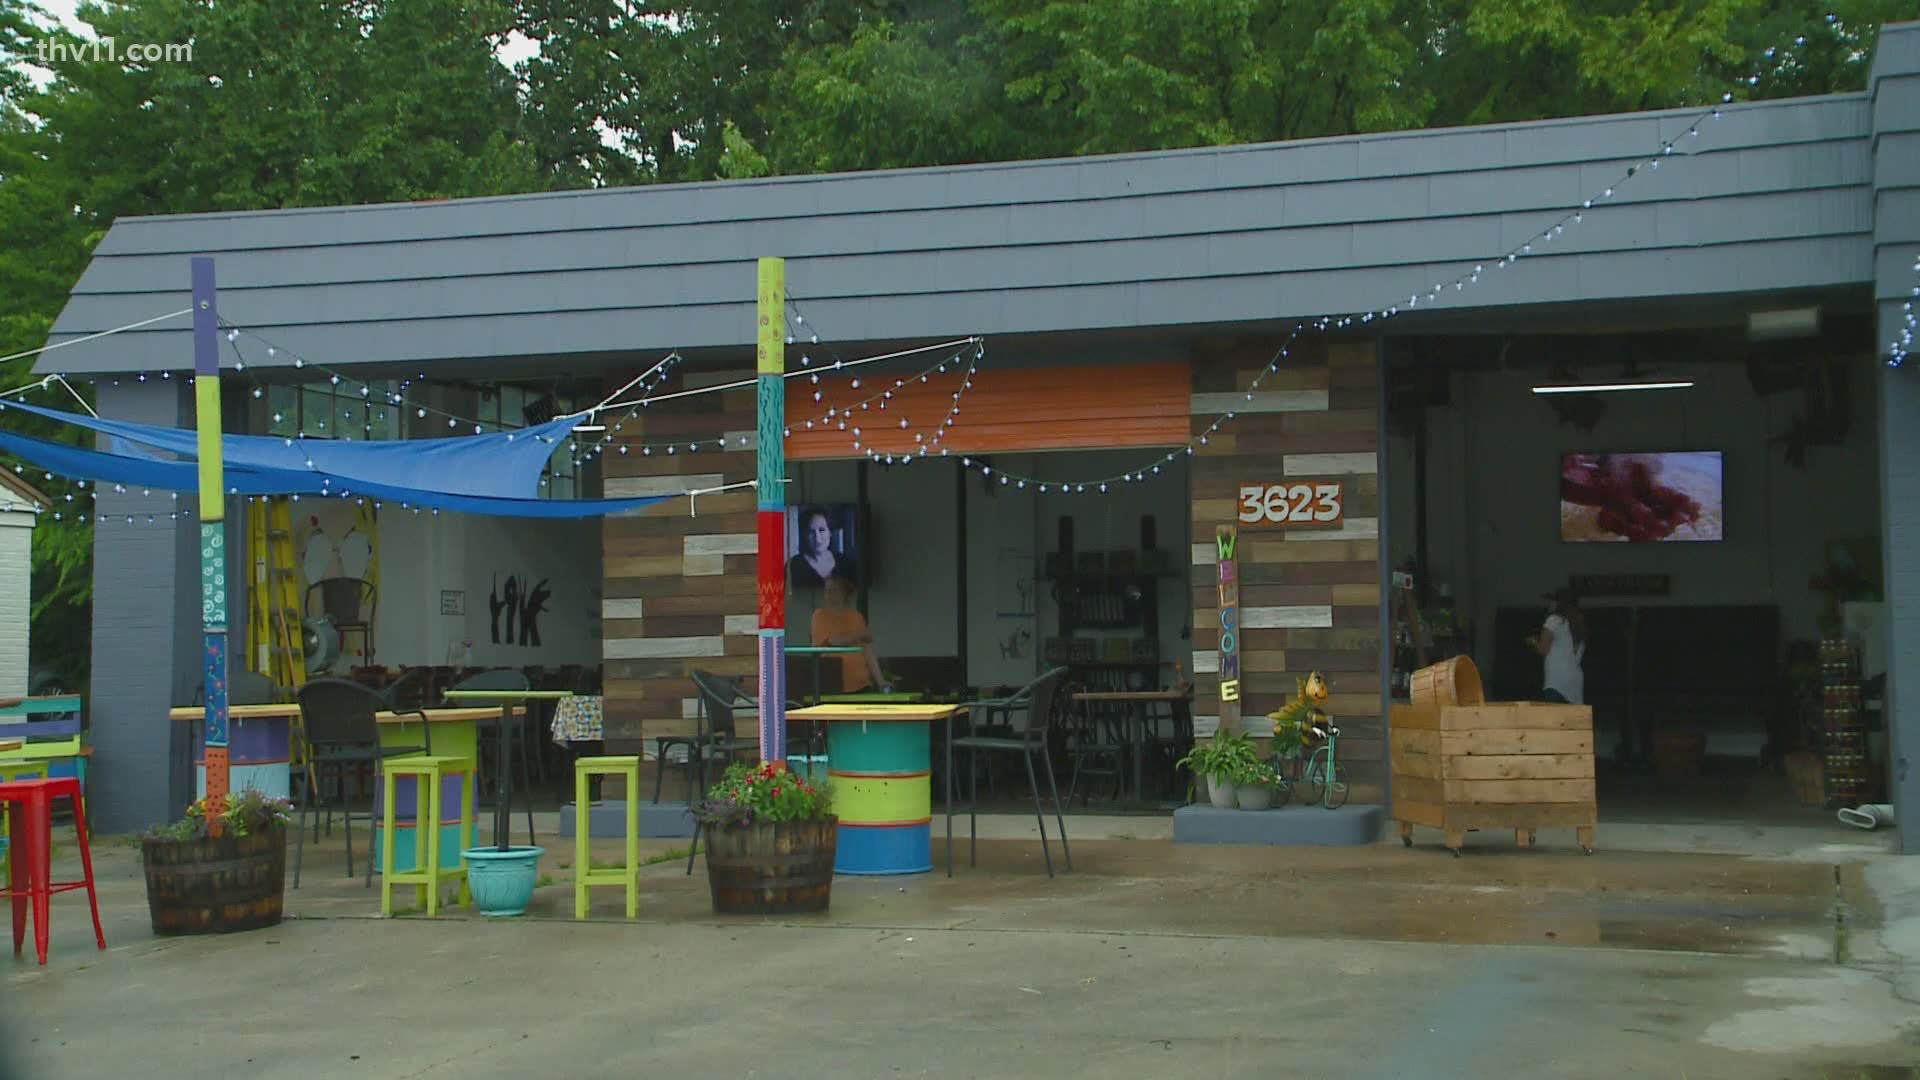 If you're looking for a fun way to spend your weekend, the filling station opened today in North Little Rock.